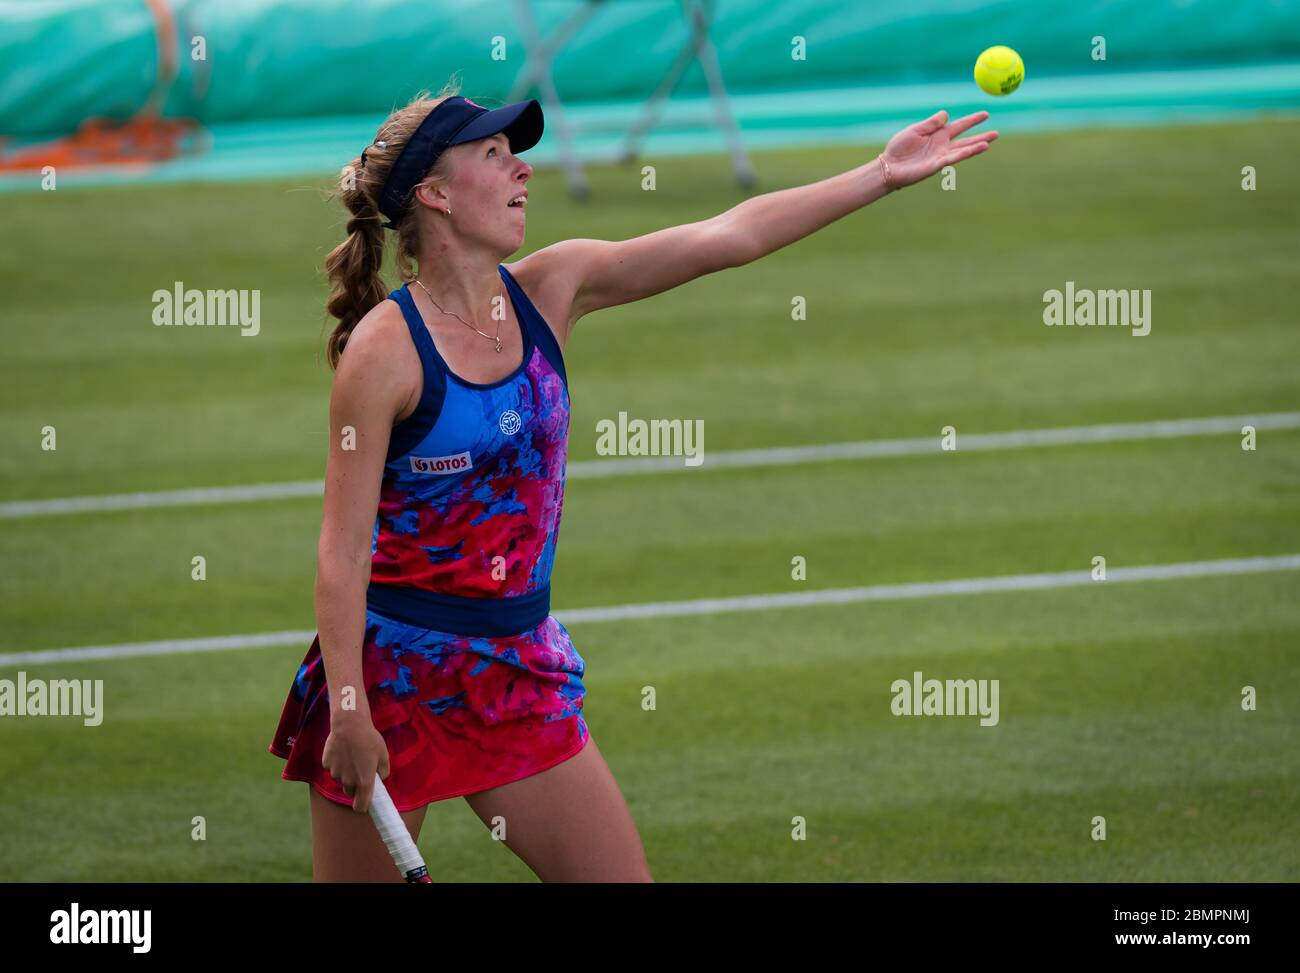 Magdalena Frech of Poland in action during qualifications at the 2019 Nature Valley Classic WTA Premier tennis tournament Stock Photo